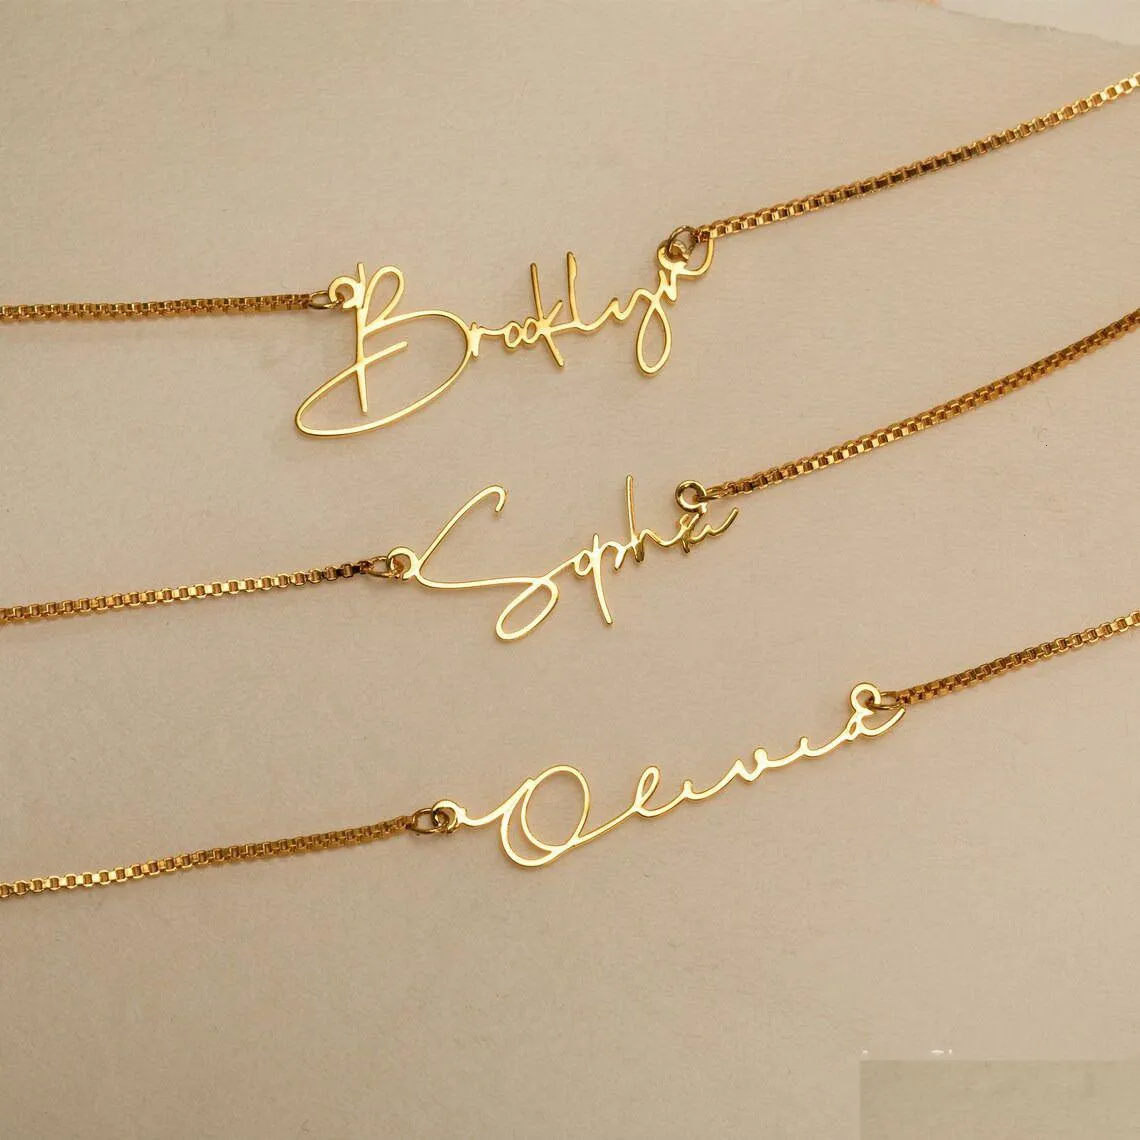 pendant necklaces personalised gold name necklace with box chain custom handmade jewelry birthday gift for her mom 230522